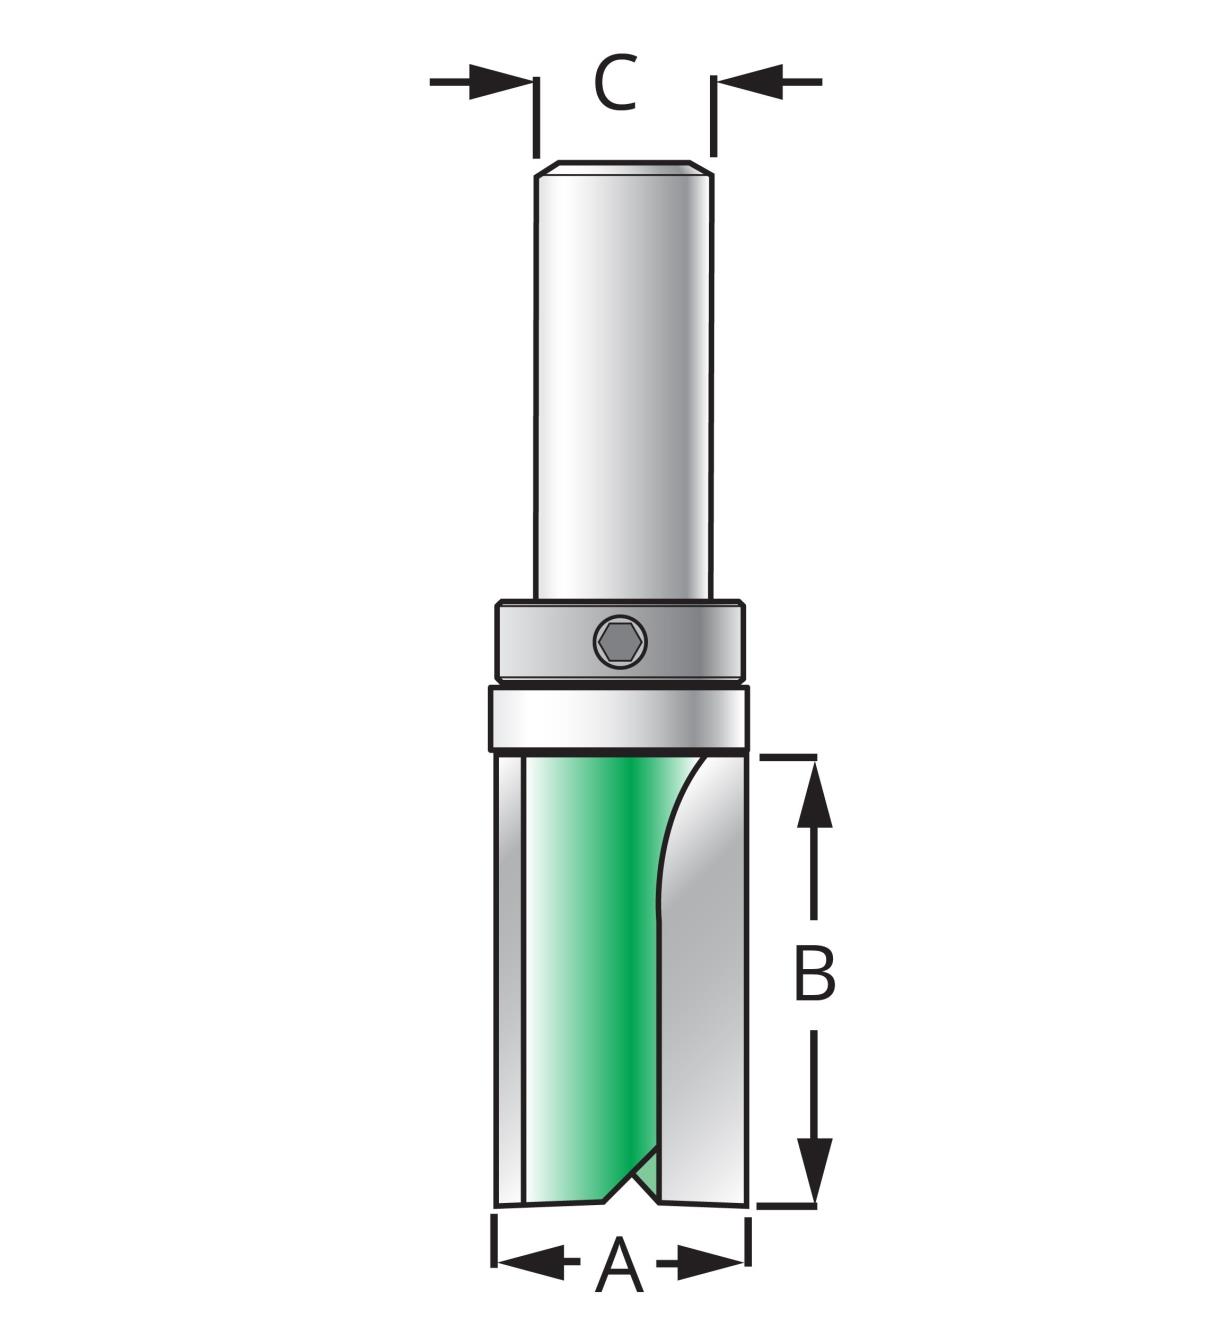 Diagram of bit labeled with letters representing measurements